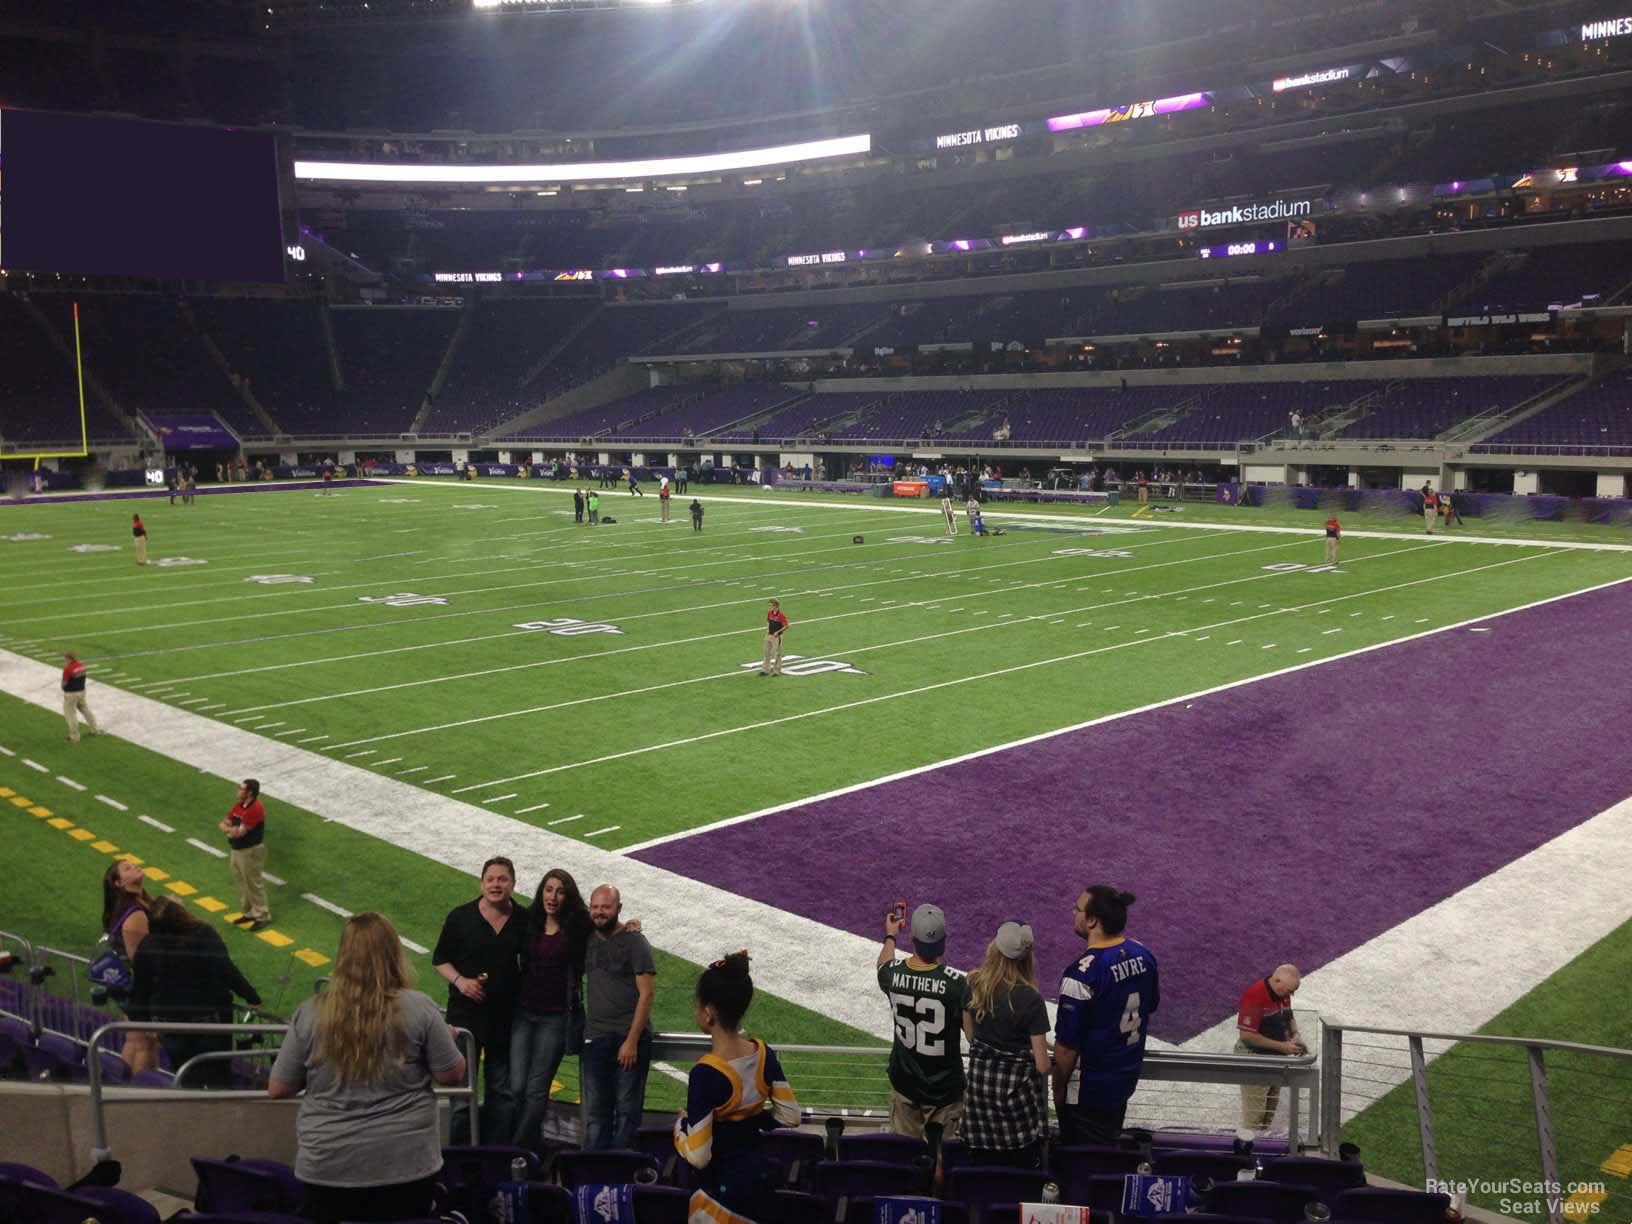 section 103, row 10 seat view  for football - u.s. bank stadium